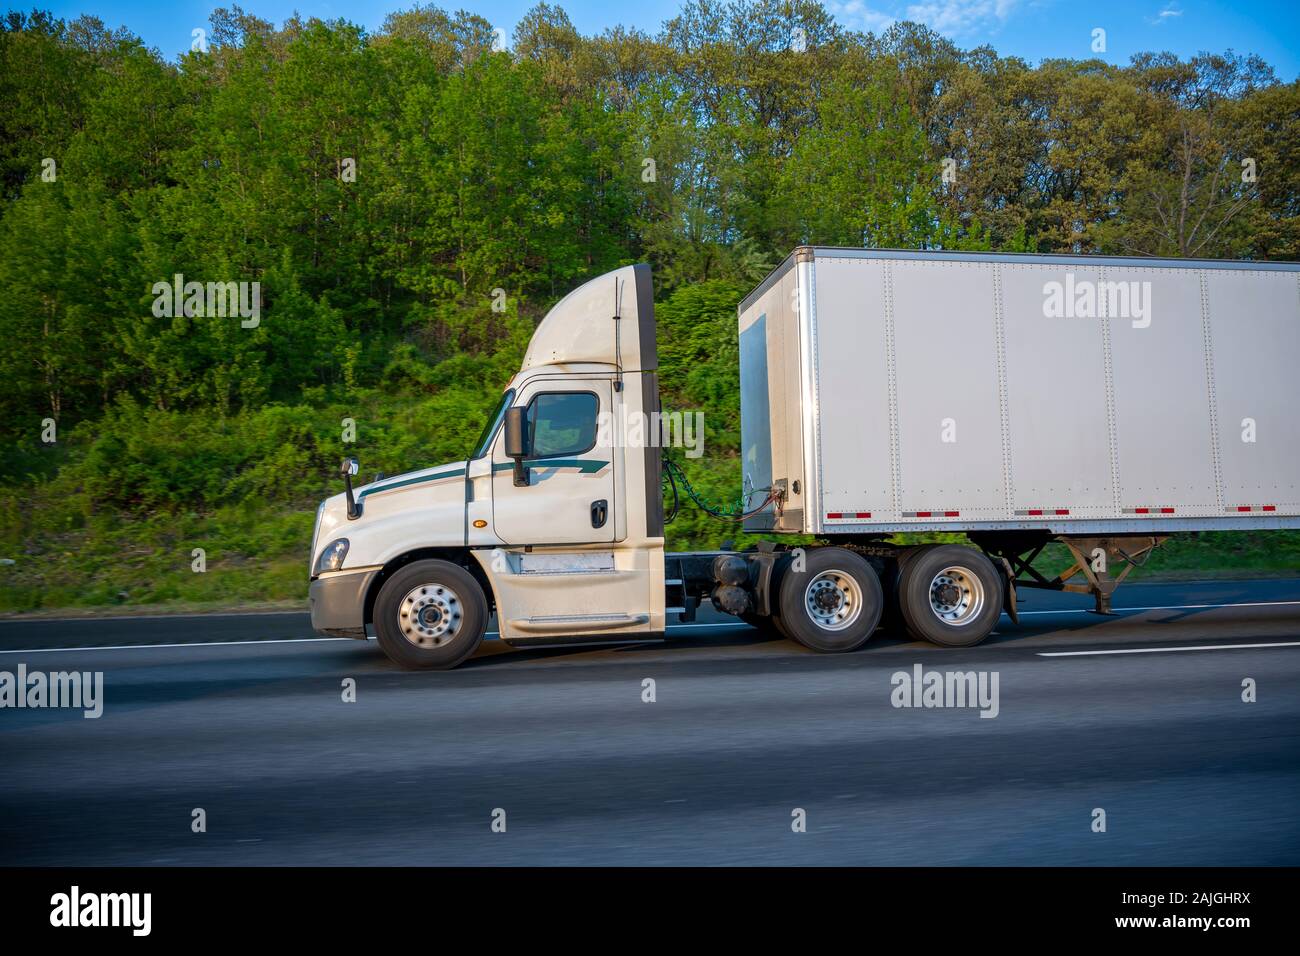 White Big rig day cab semi truck with roof spoiler for better aerodynamics and air resistance improvements transporting cargo in dry van semi trailer Stock Photo